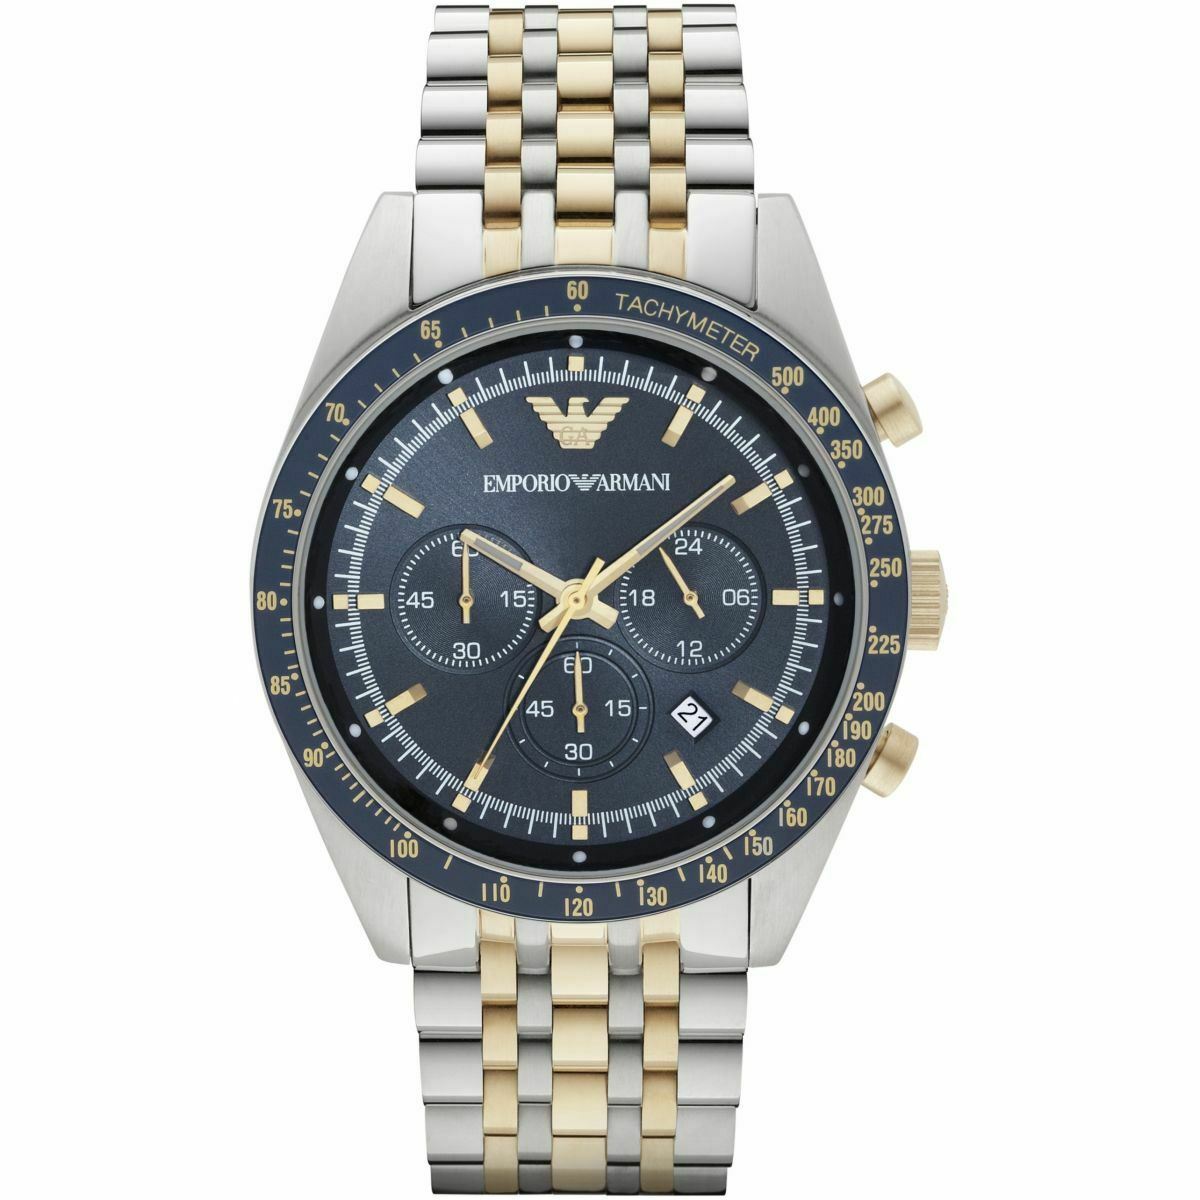 Emporio Armani AR6088 Chronograph Two Tone Stainless Steel Men's Watch